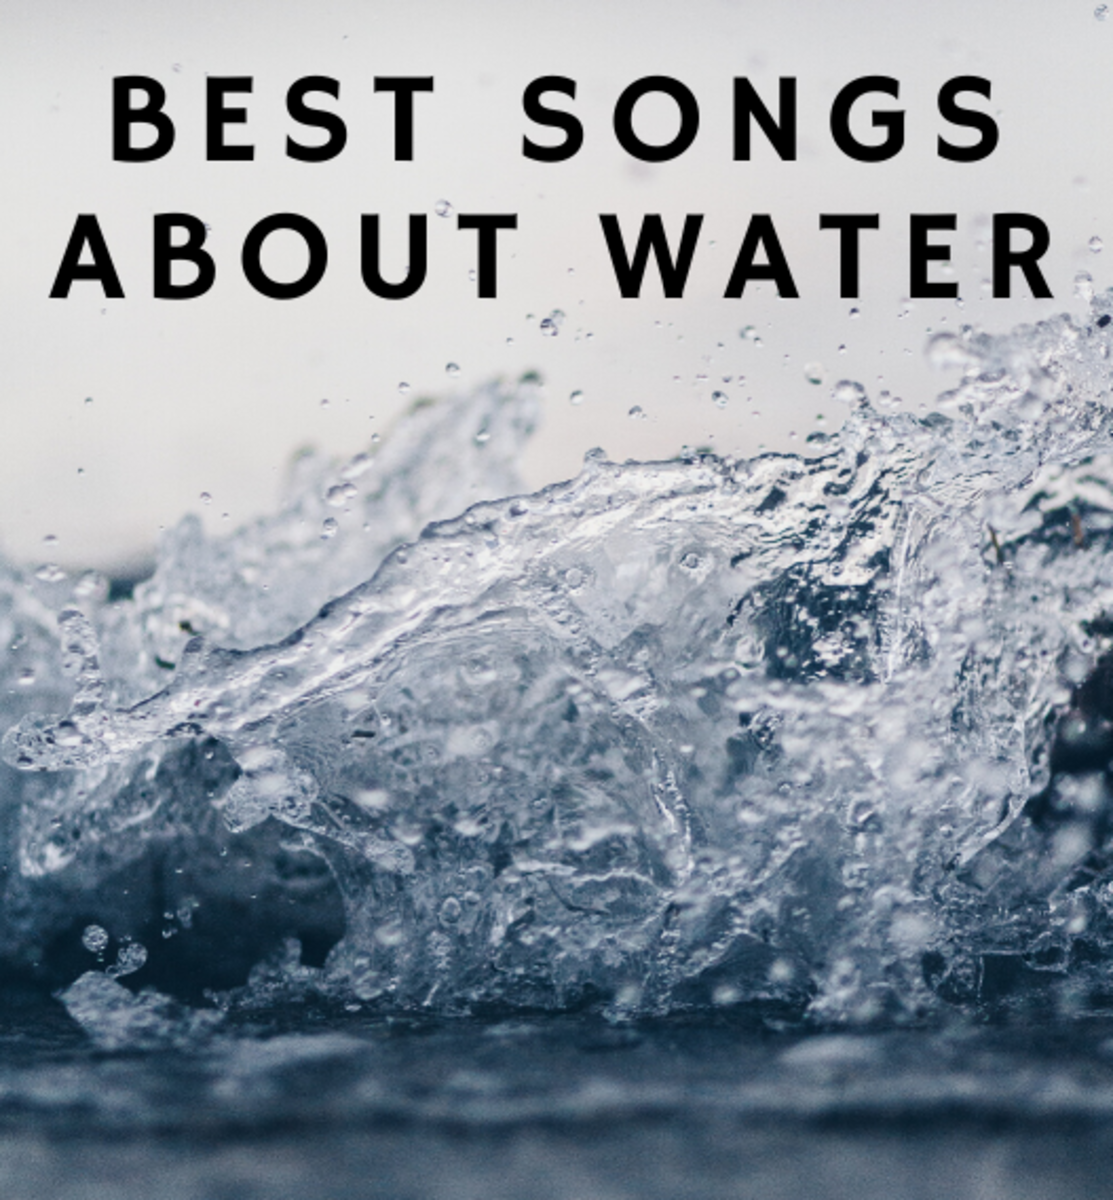 Water has been used as a metaphor for thousands of years. These songs use this metaphoric image perfectly. 